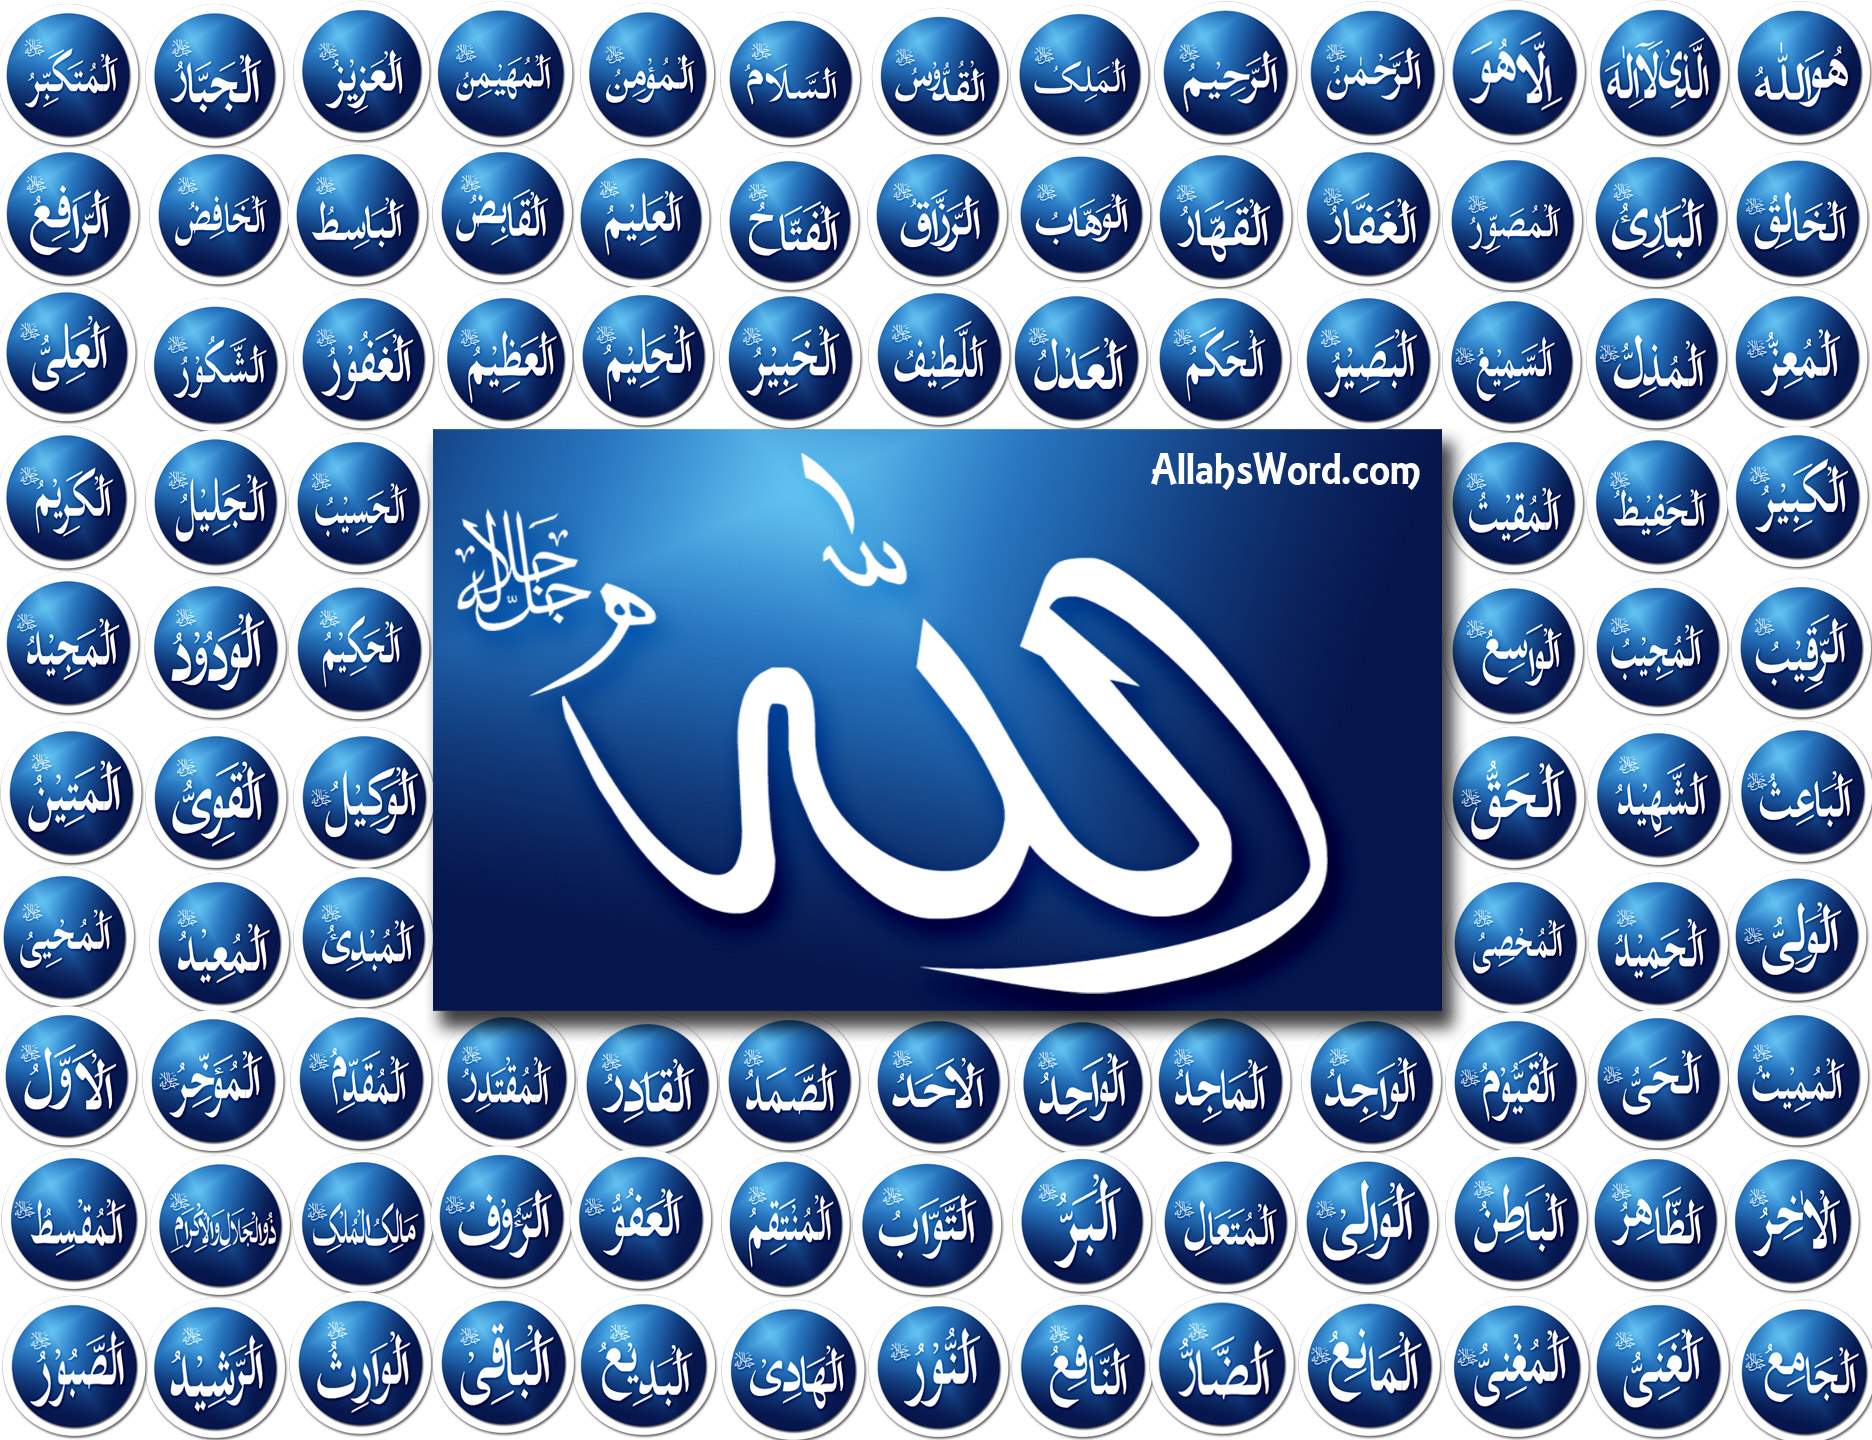 Allah's Word HD Islamic Desktop Wallpaper and Picture